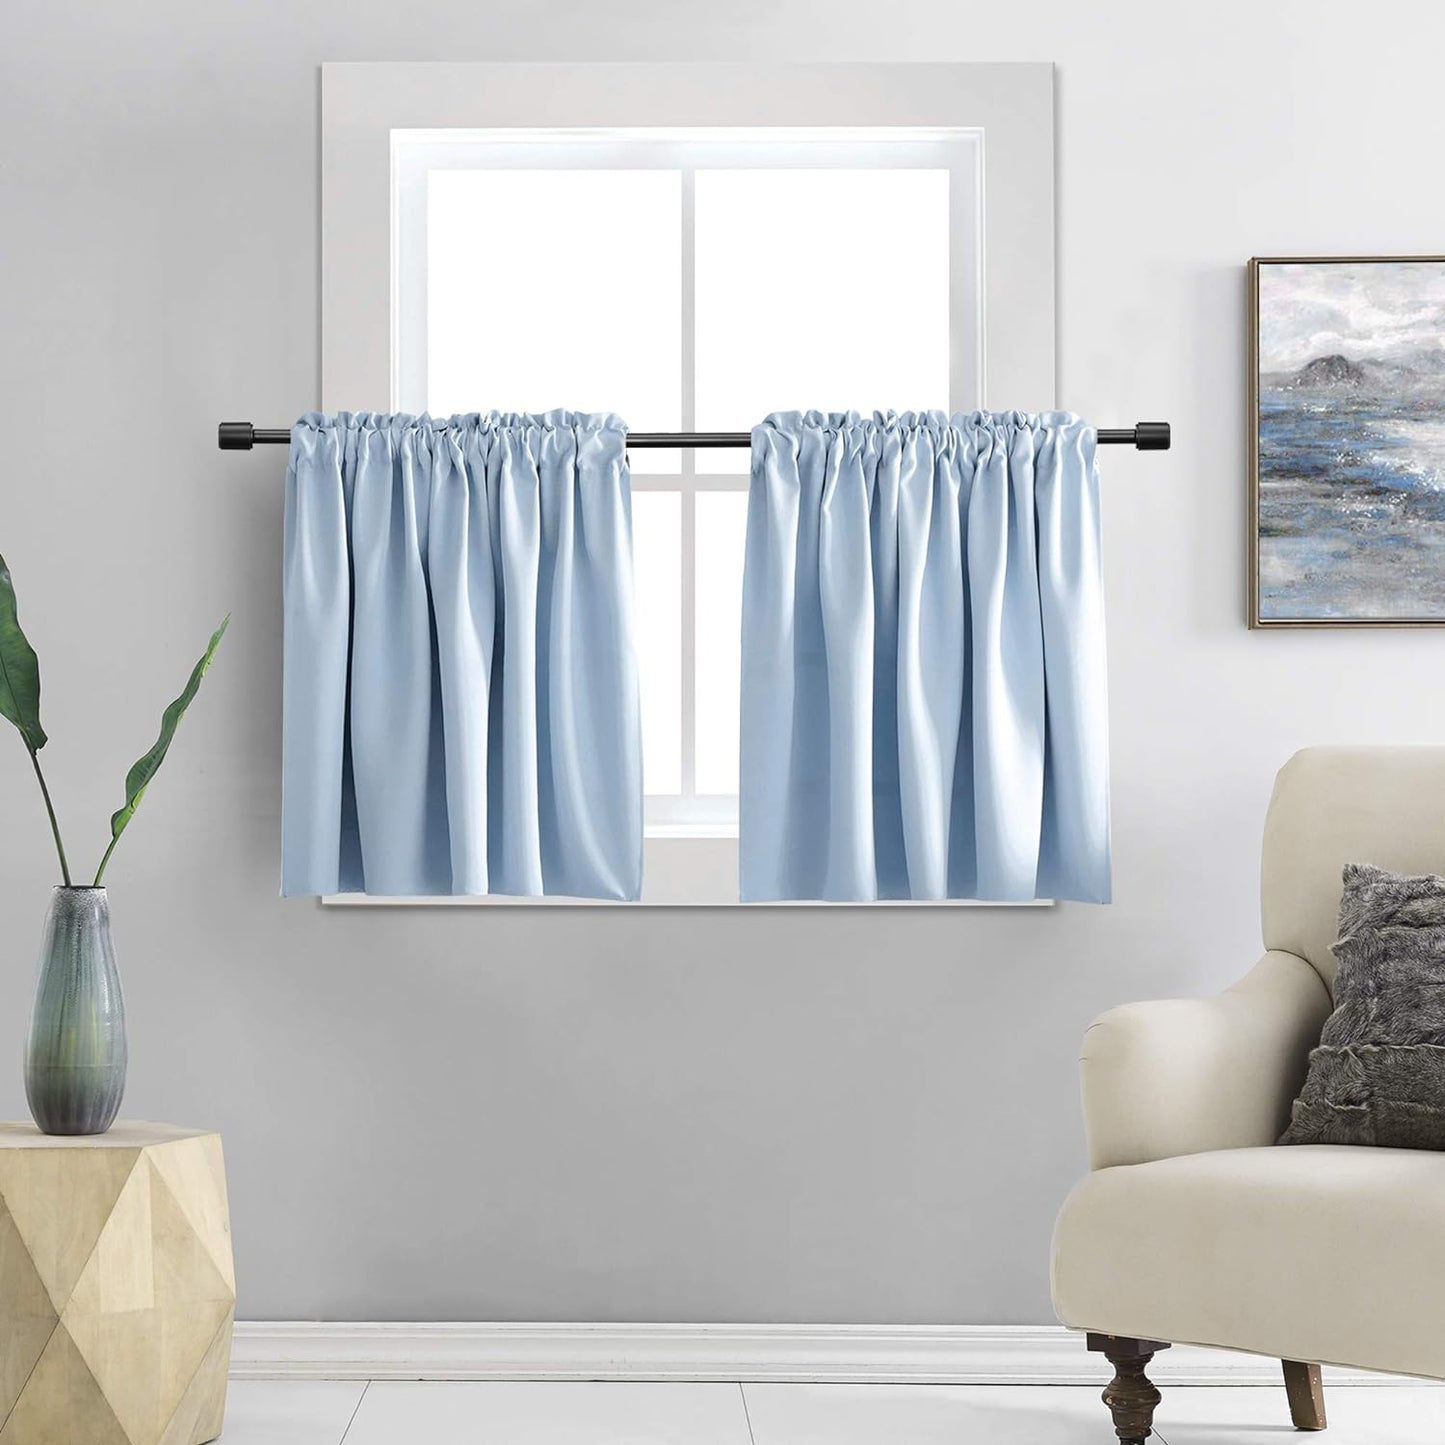 DONREN 24 Inch Length Curtains- 2 Panels Blackout Thermal Insulating Small Curtain Tiers for Bathroom with Rod Pocket (Black,42 Inch Width)  DONREN Light Blue 52" X 36" 